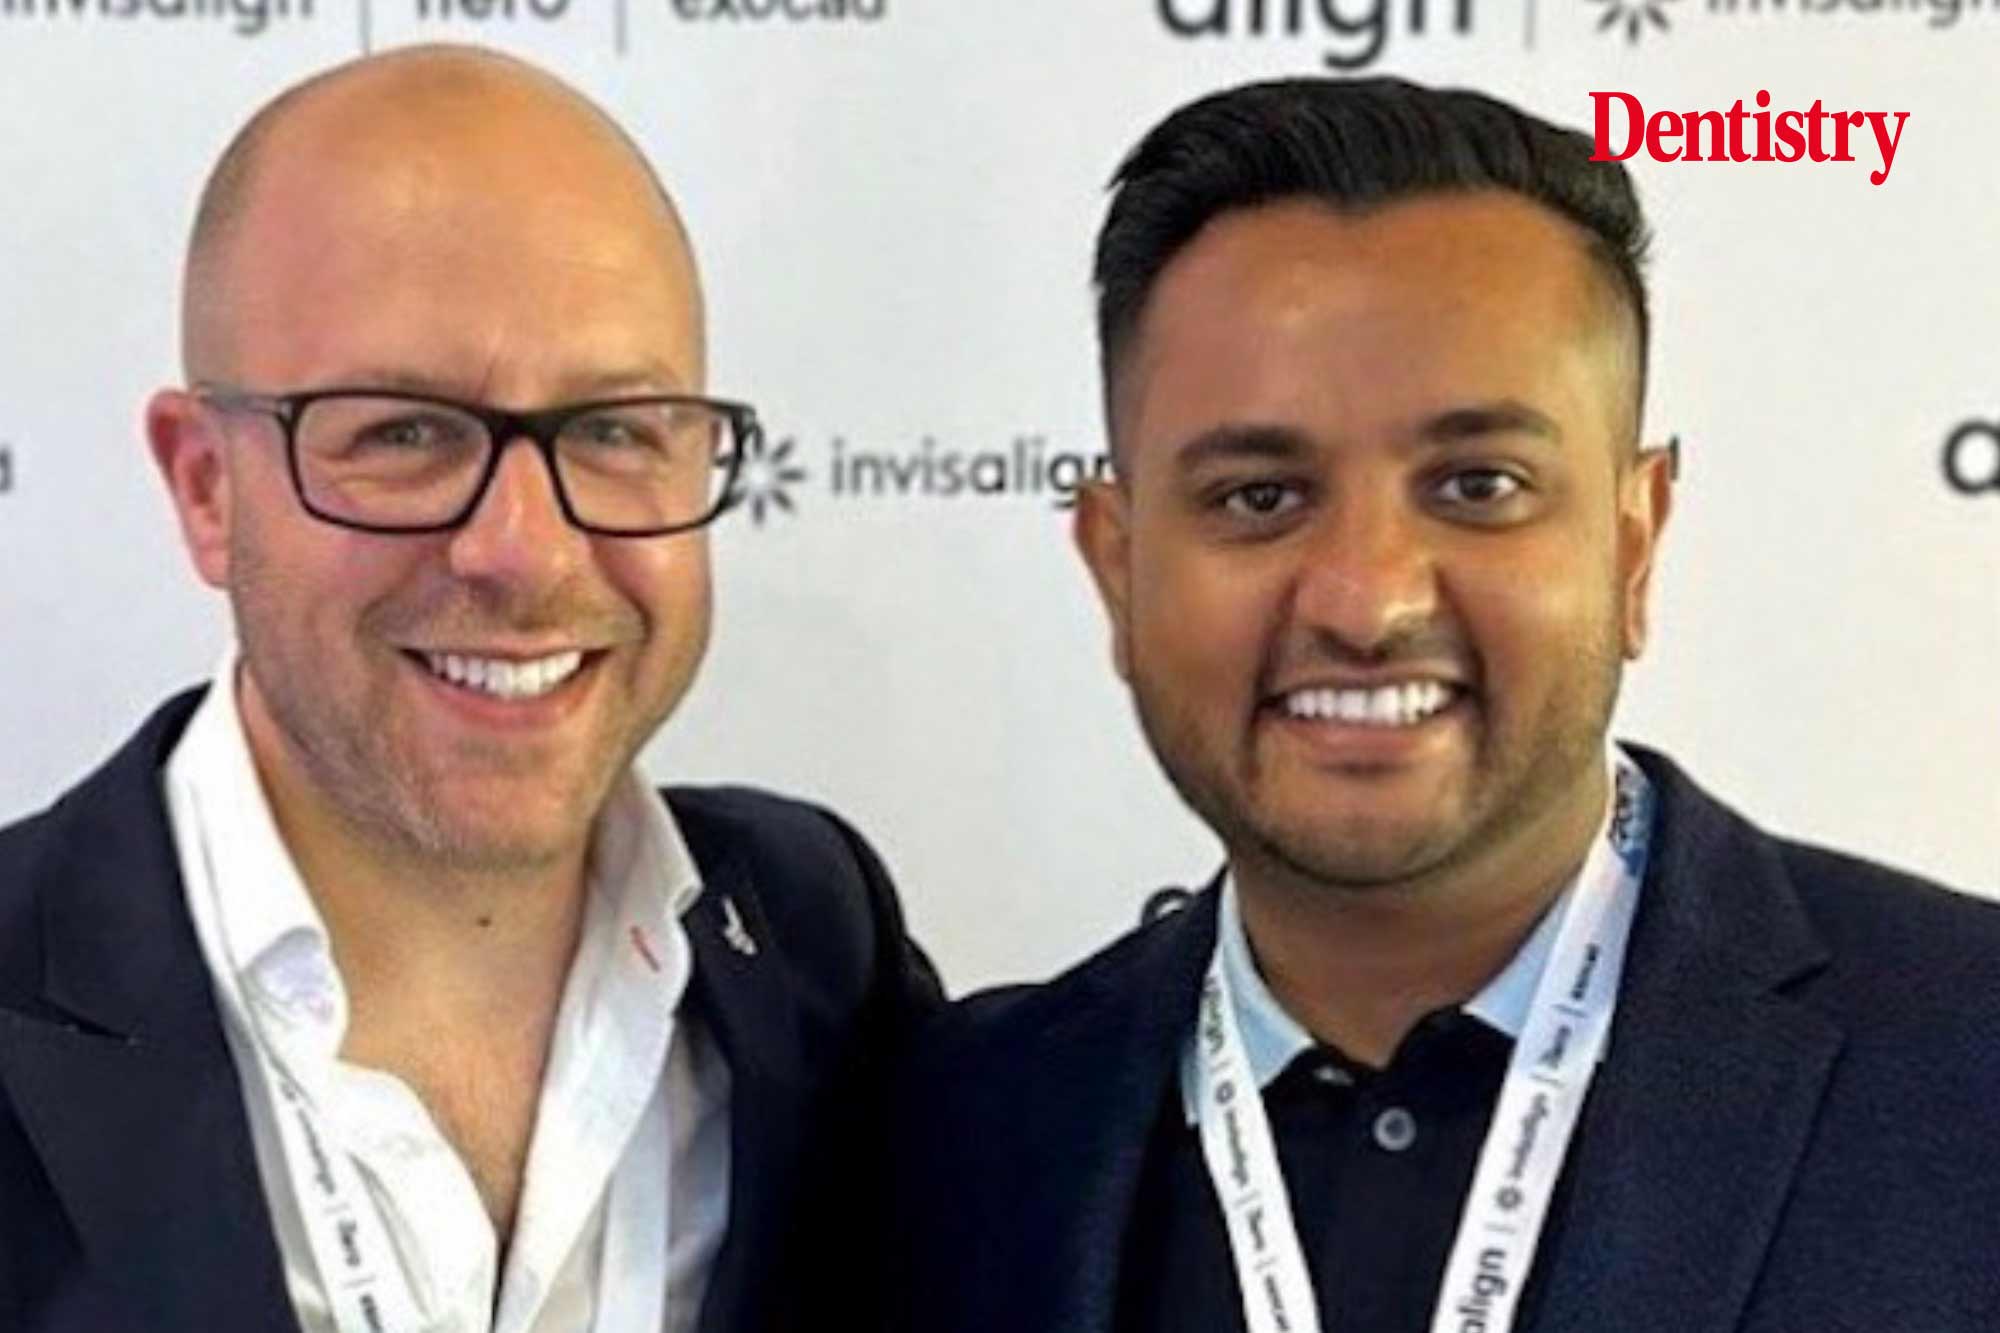 Utilising an intraoral scanner in the consultation setting is now an essential skillset which Drs Marcos White and Kunal Patel teach in a practical new training program.